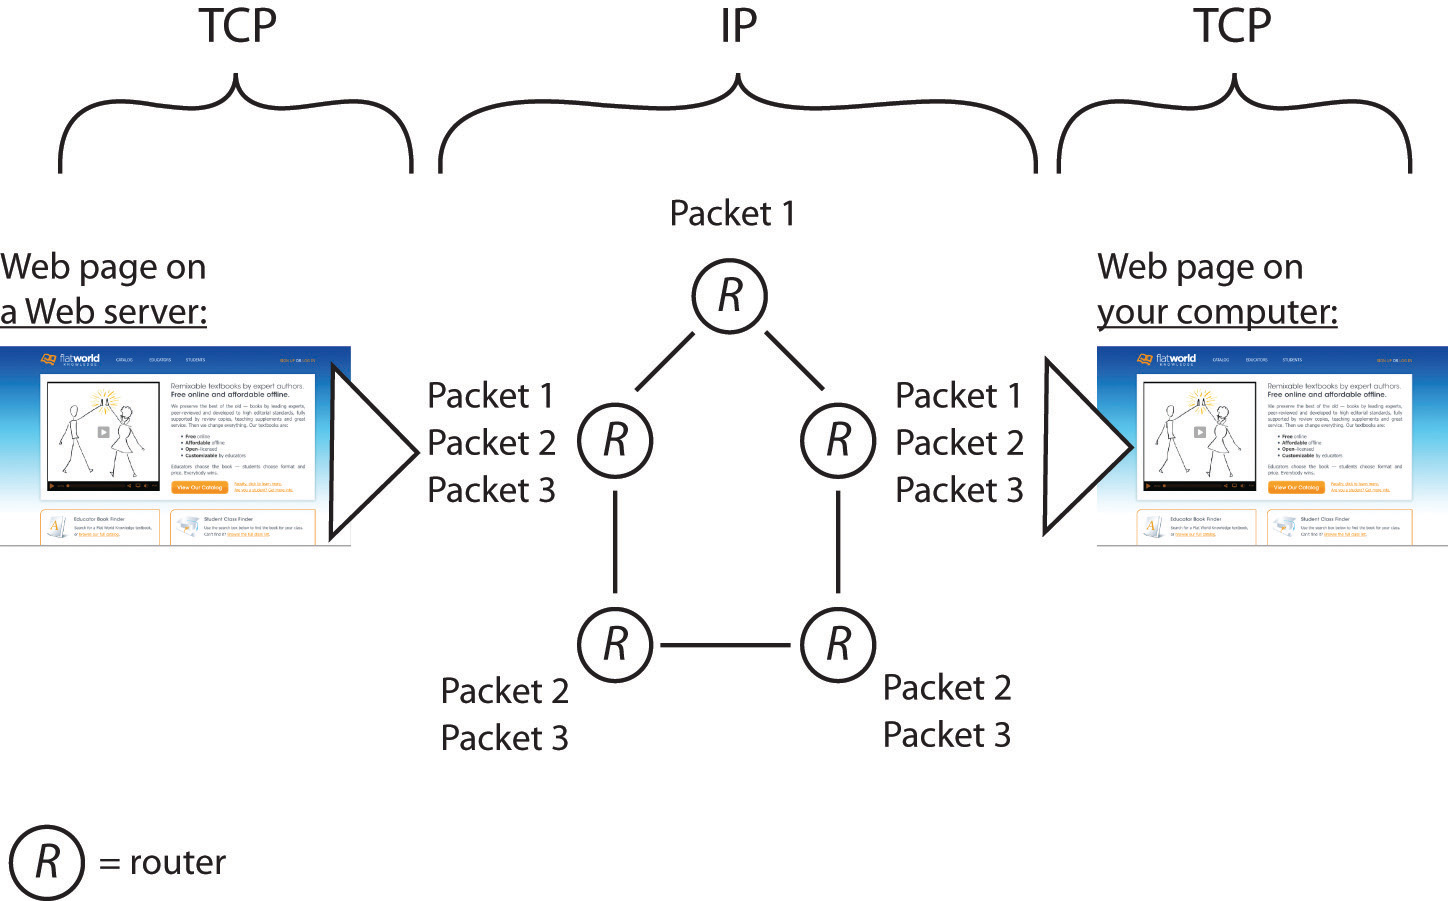 In this example, a server on the left sends a Web page to the user on the right. The application (the Web server) passes the contents of the page to TCP (which is built into the server’s operating system). TCP slices the Web page into packets. Then IP takes over, forwarding packets from router to router across the Internet until it arrives at the user’s PC. Packets sometimes take different routes, and occasionally arrive out of order. TCP running on the receiving system on the right checks that all packets have arrived, requests that damaged or lost packets be resent, puts them in the right order, and sends a perfect, exact copy of the Web page to your browser.